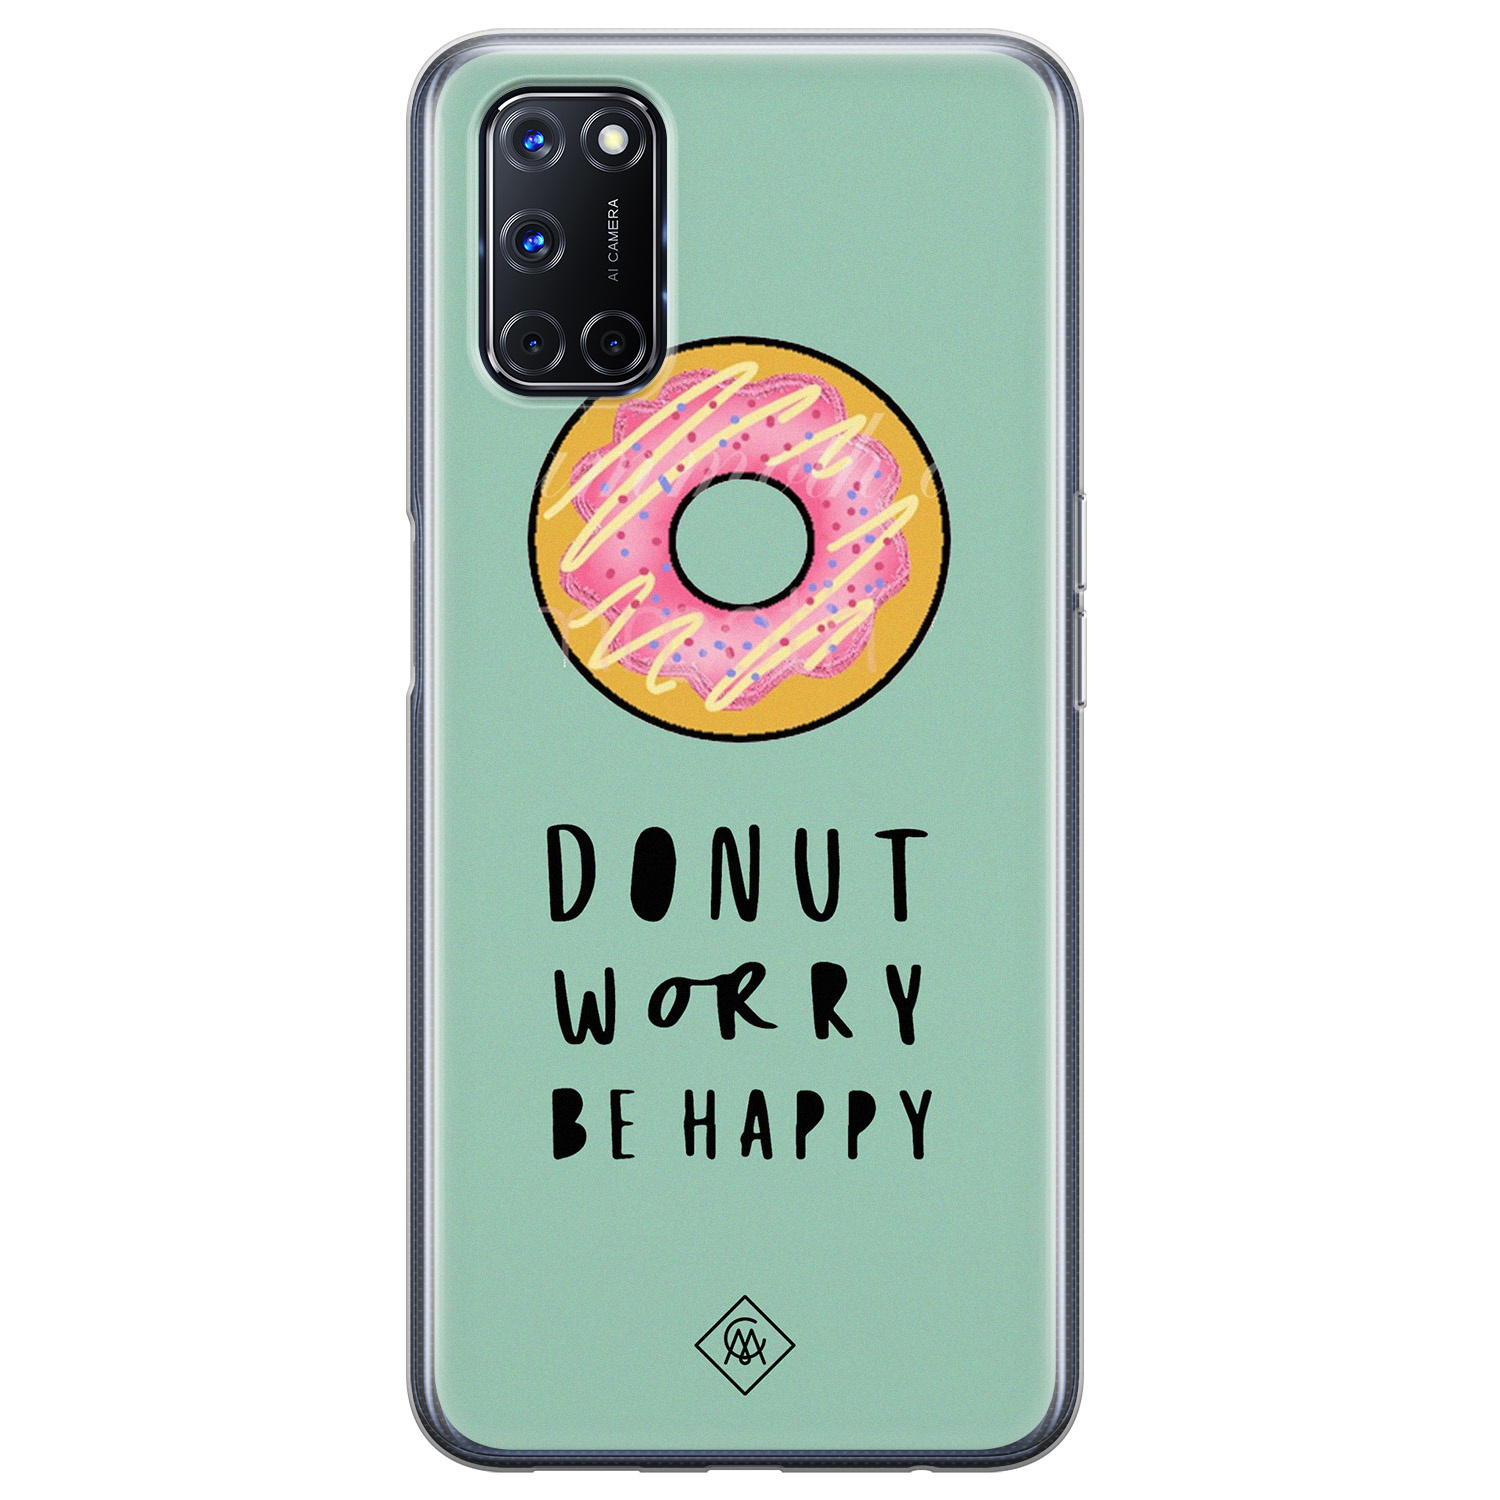 Oppo A72 siliconen hoesje - Donut worry